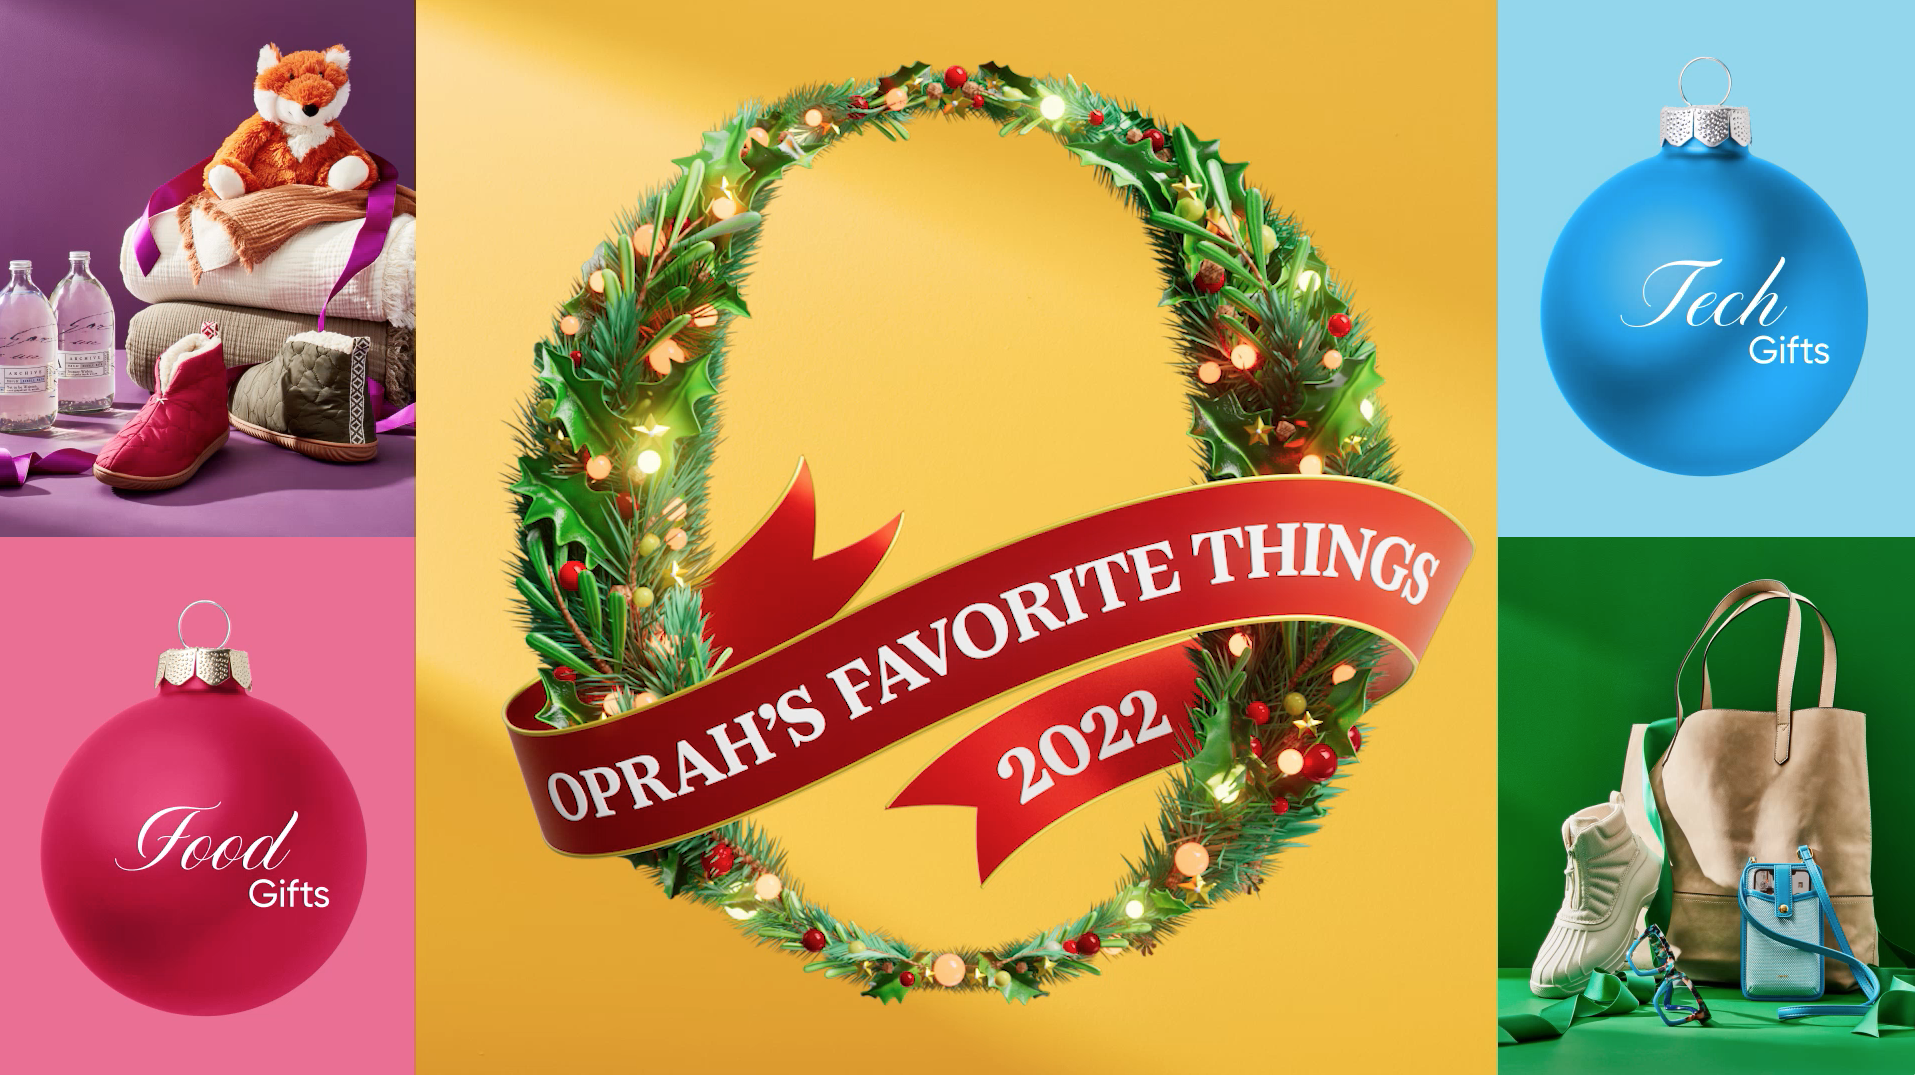 The Best Gifts for Teen Girls from Oprah's Favorite Things